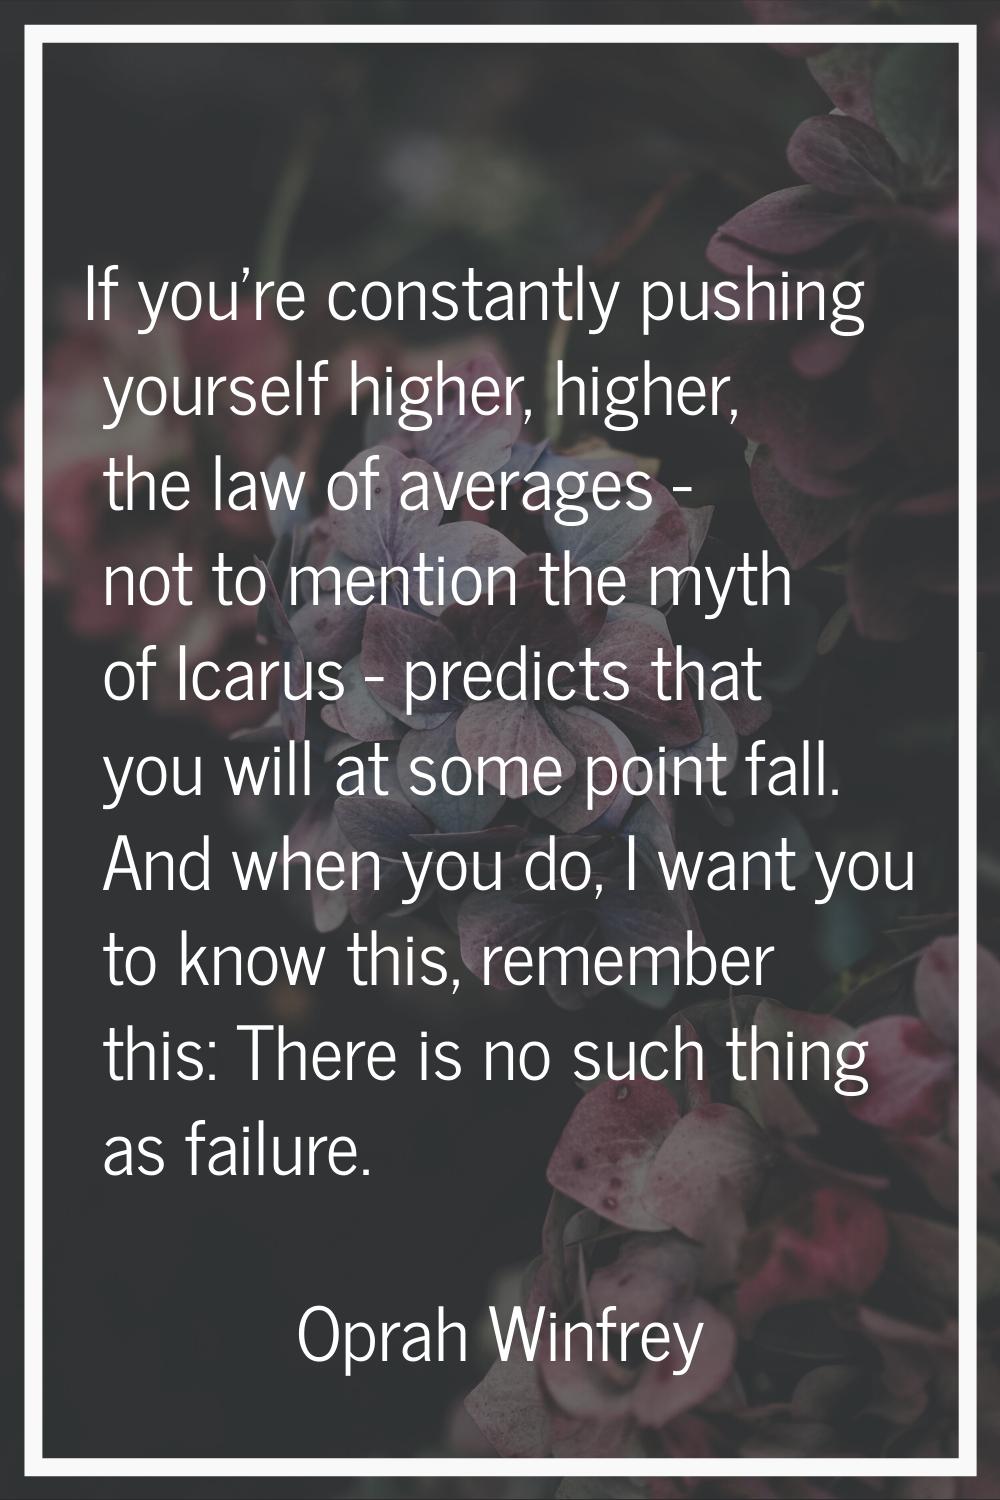 If you're constantly pushing yourself higher, higher, the law of averages - not to mention the myth